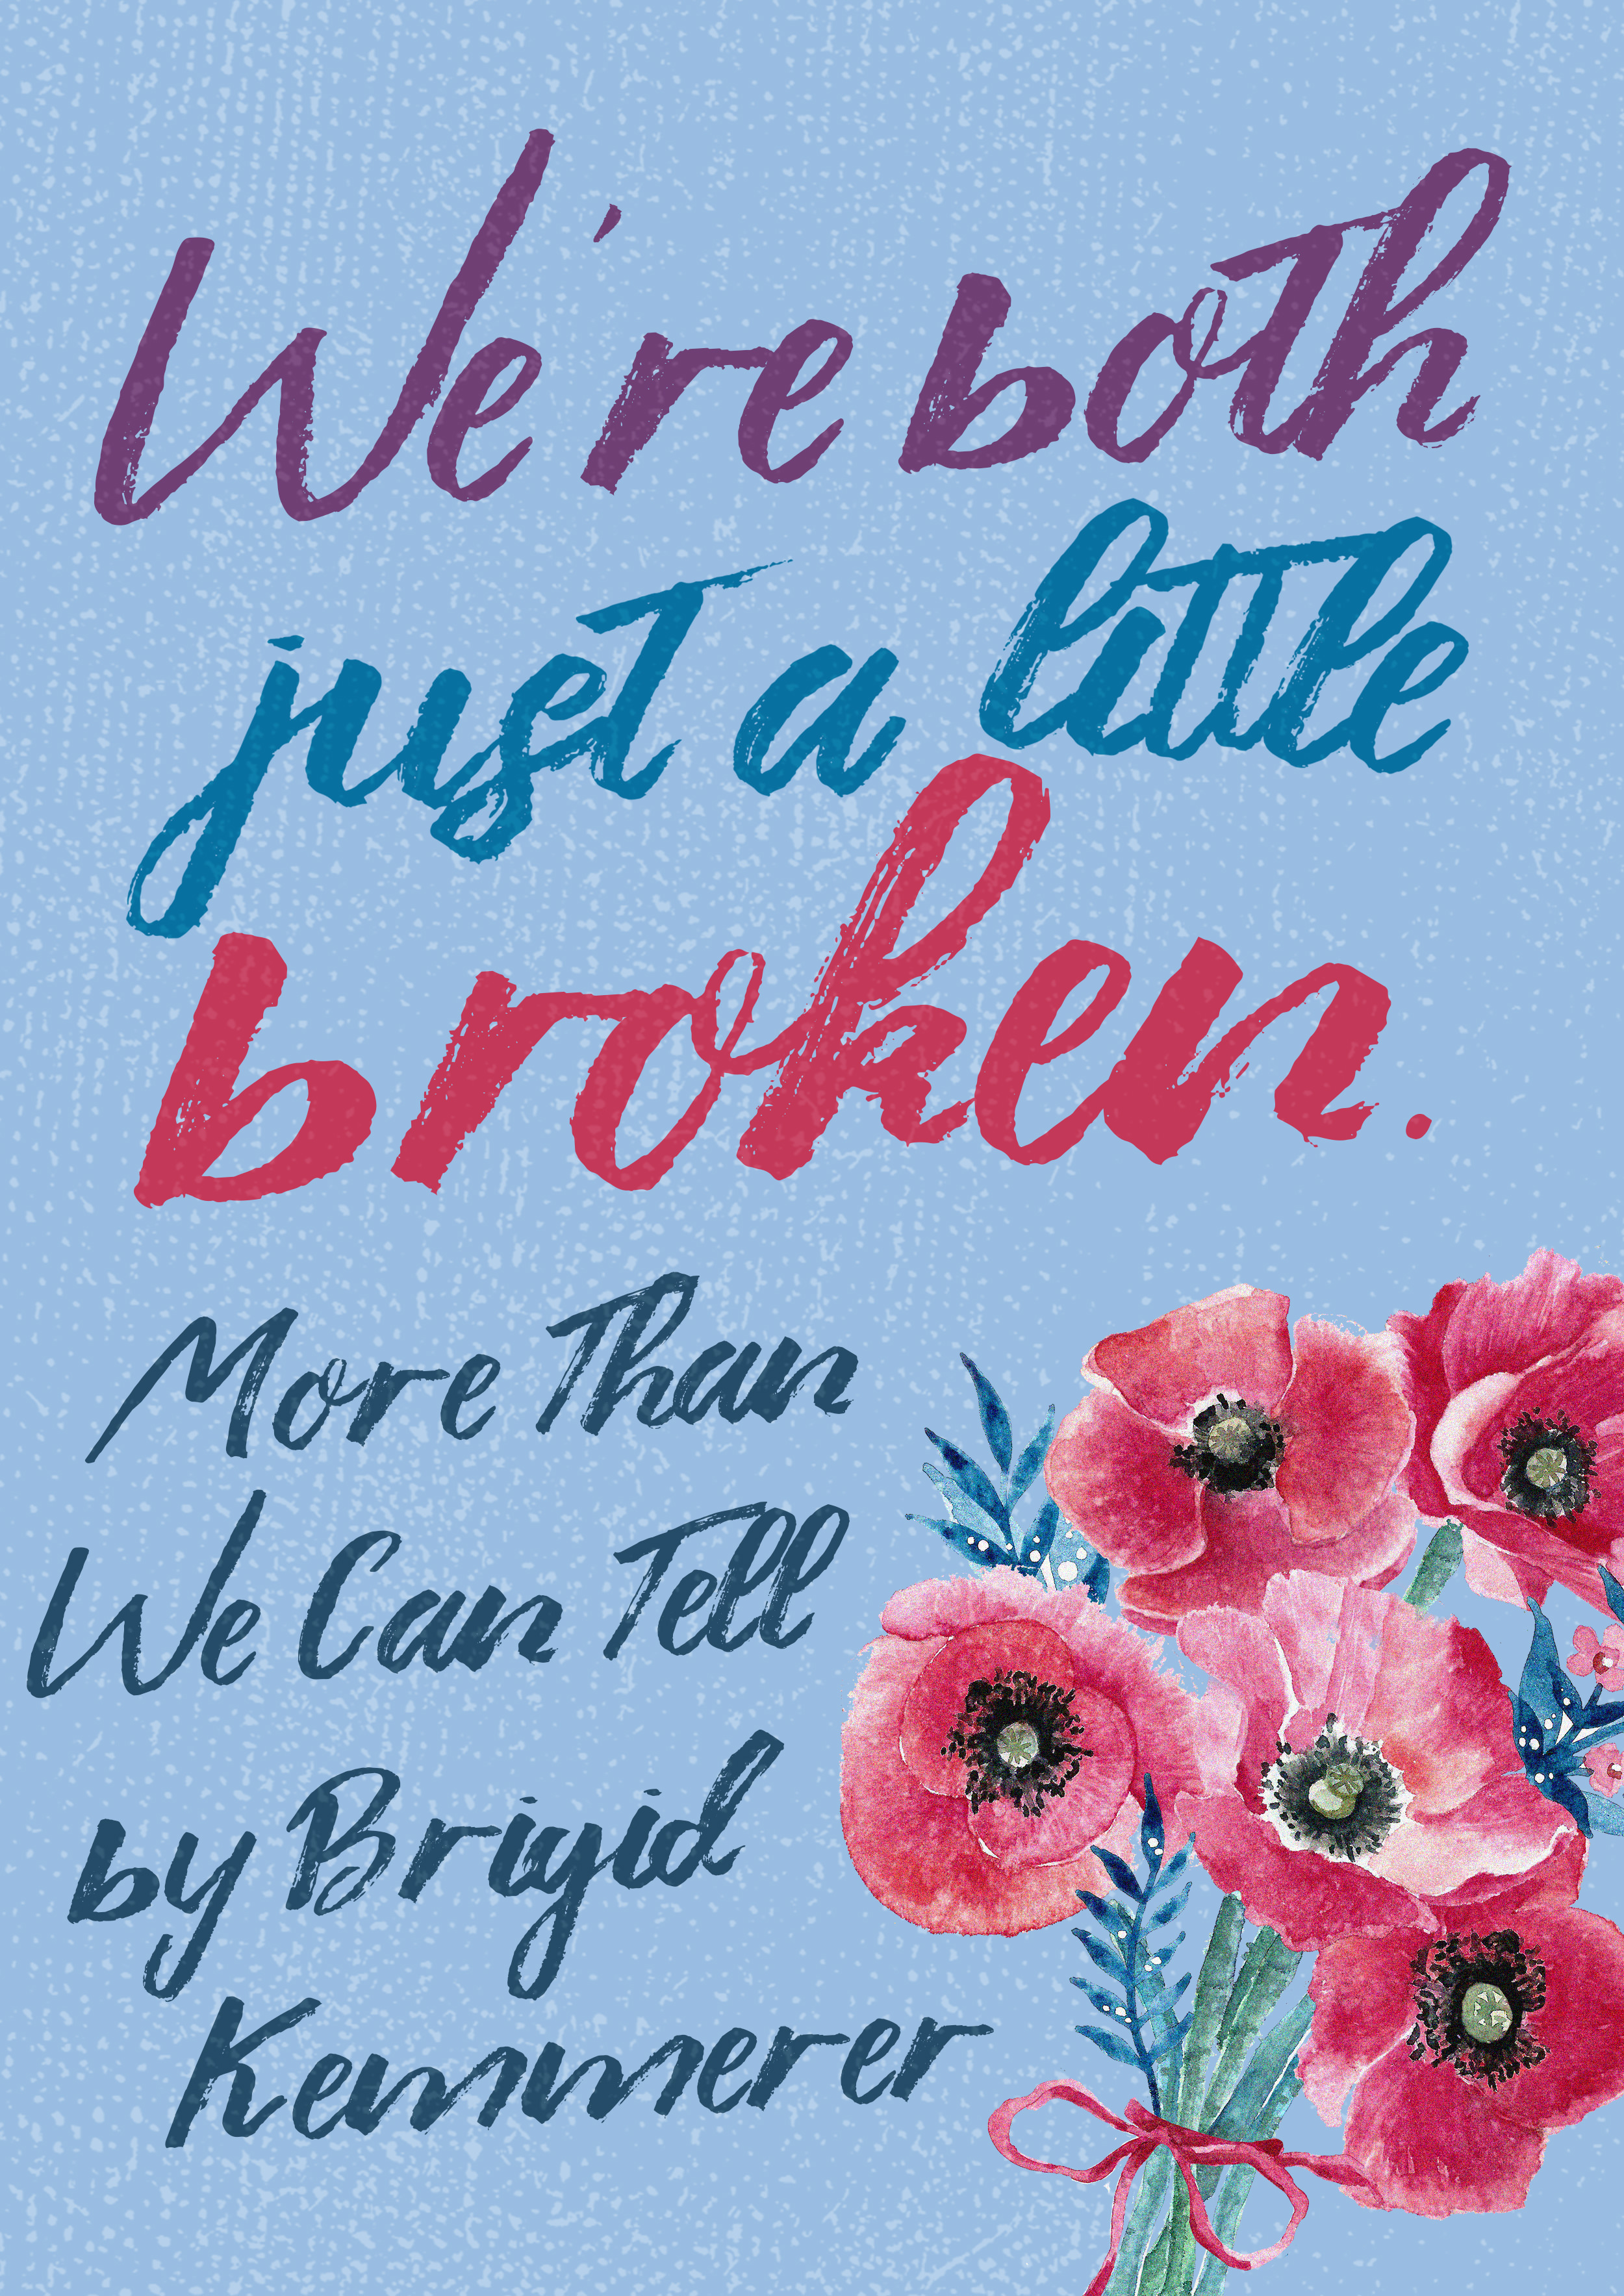 More Than We Can Tell by Brigid Kemmerer Quote Poster - We're both just a little broken